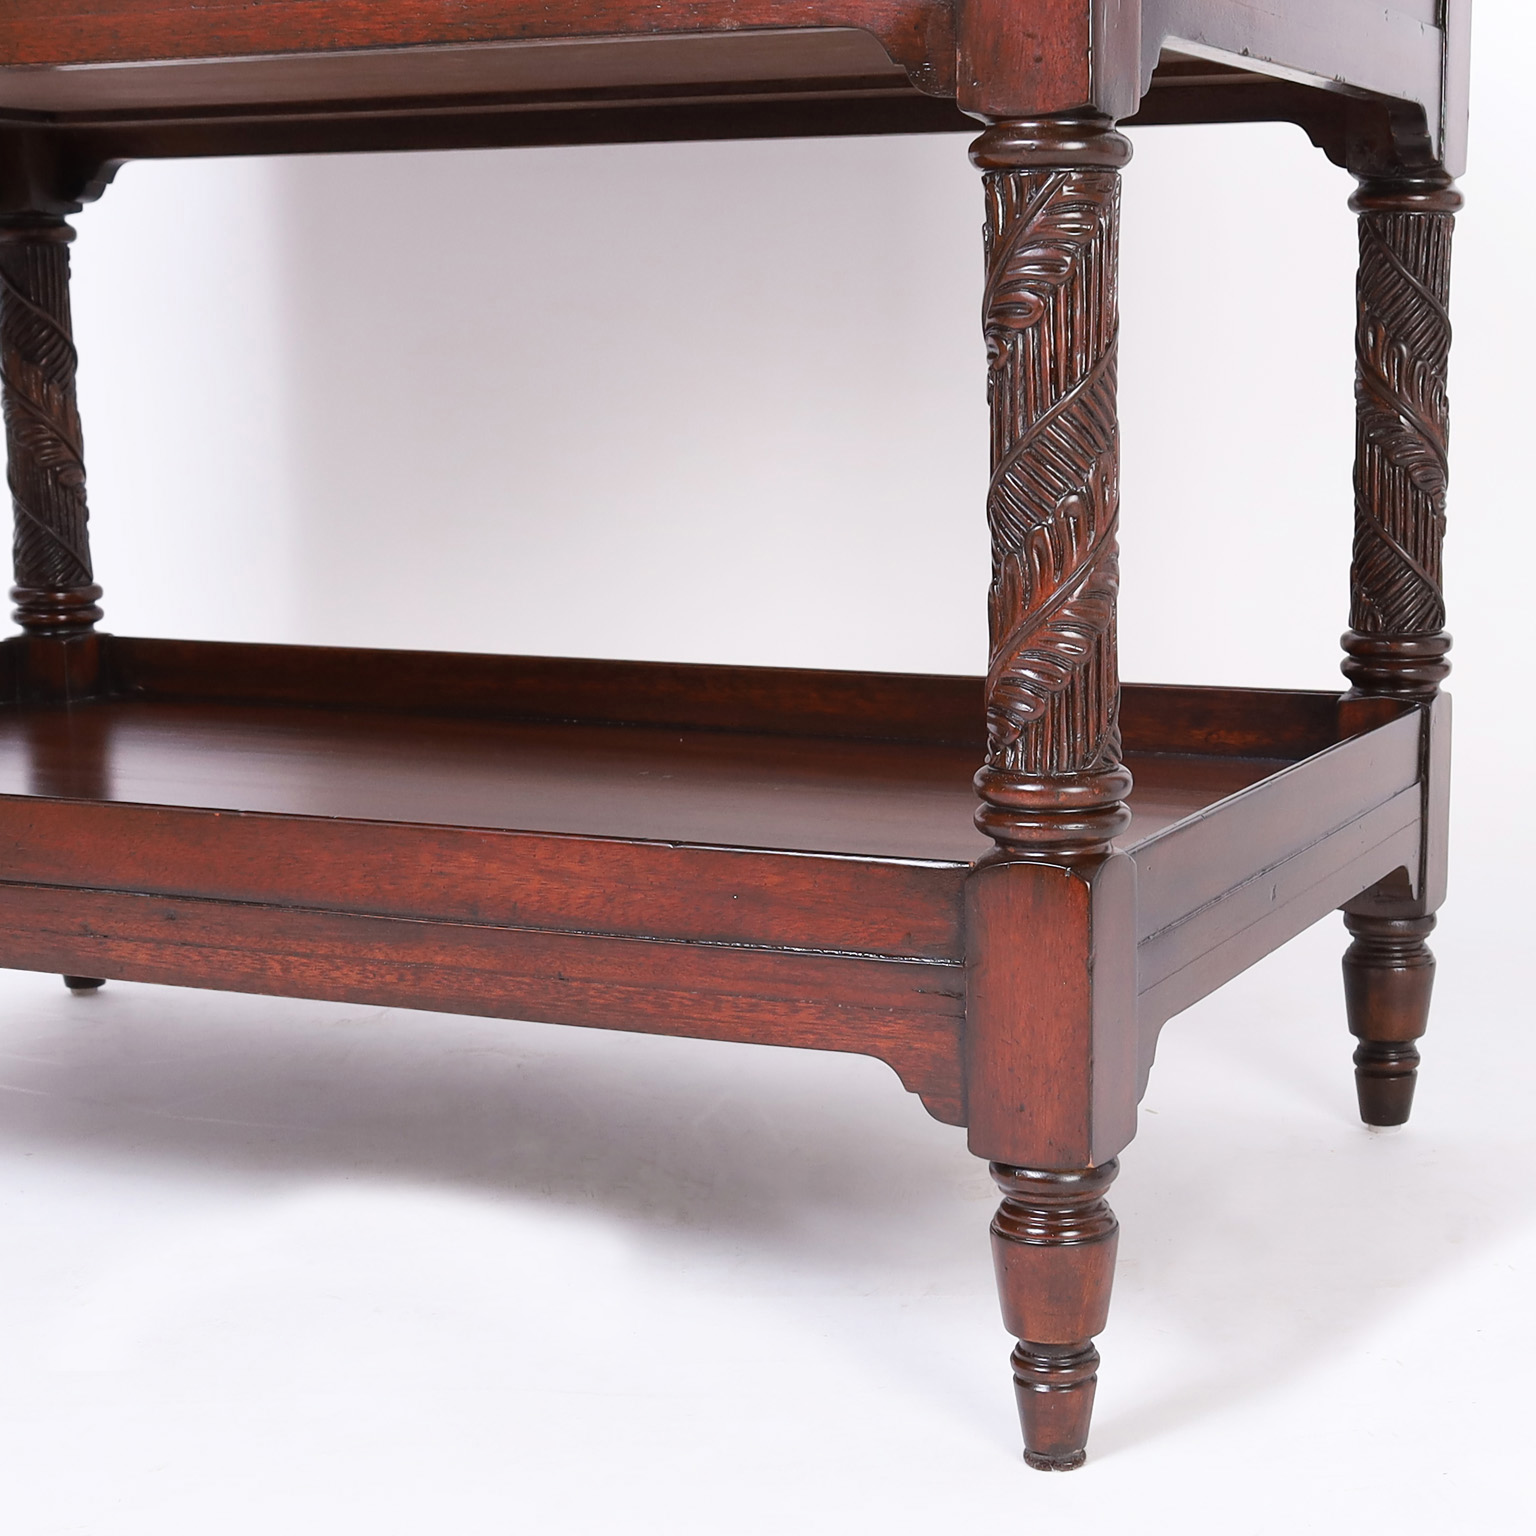 British Colonial Two Tiered Server or Stand